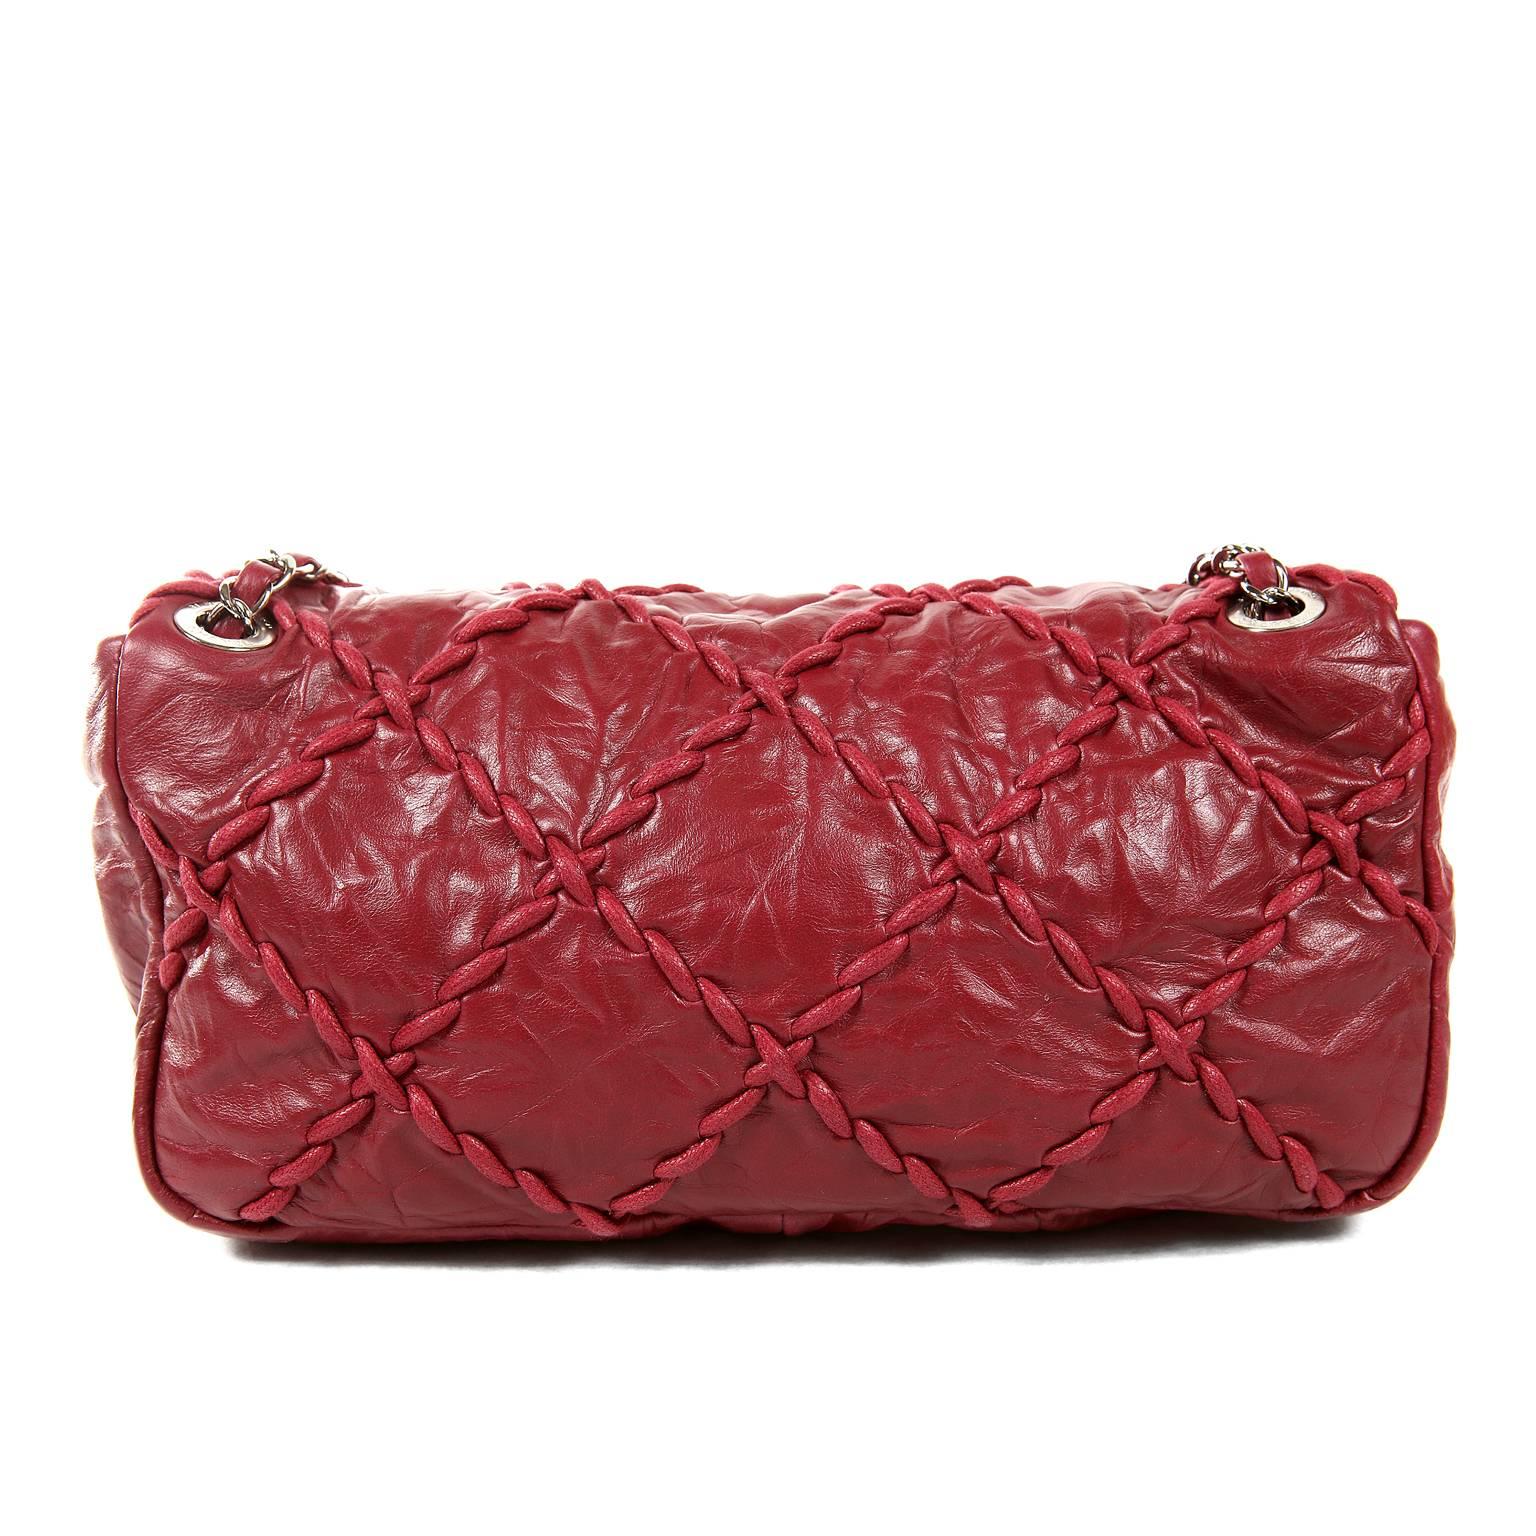 Chanel Red Calfskin Ultra Stitch Flap Bag- Pristine; appears never carried.
Uniquely detailed with distinct top stitching and intentionally wrinkled leather, the Ultra Stitch is eye catching and edgy. 
Deep red wrinkled calfskin is top stitched in